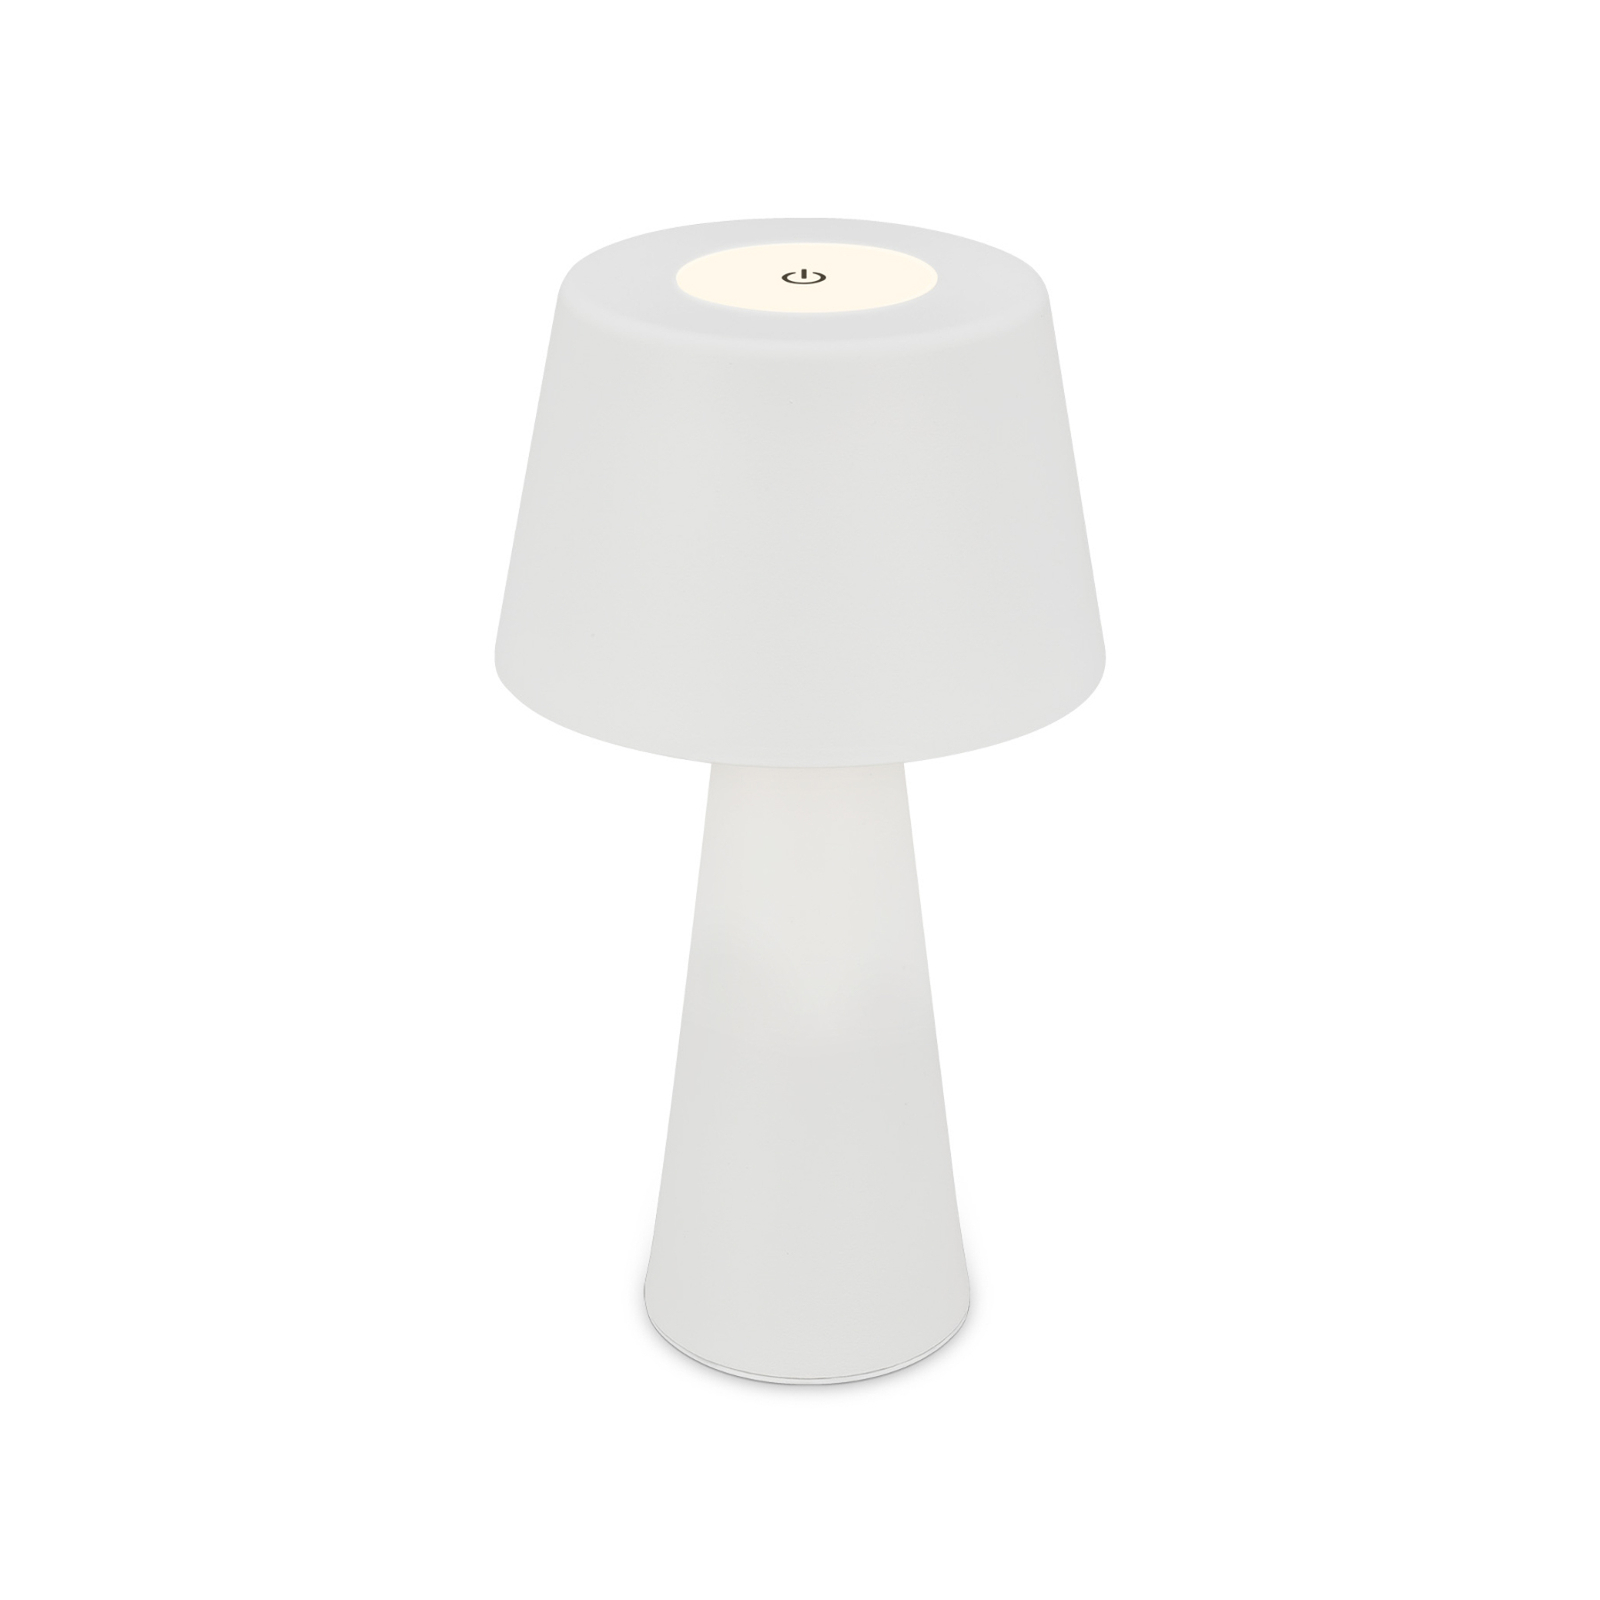 Kihi LED table lamp rechargeable battery, white